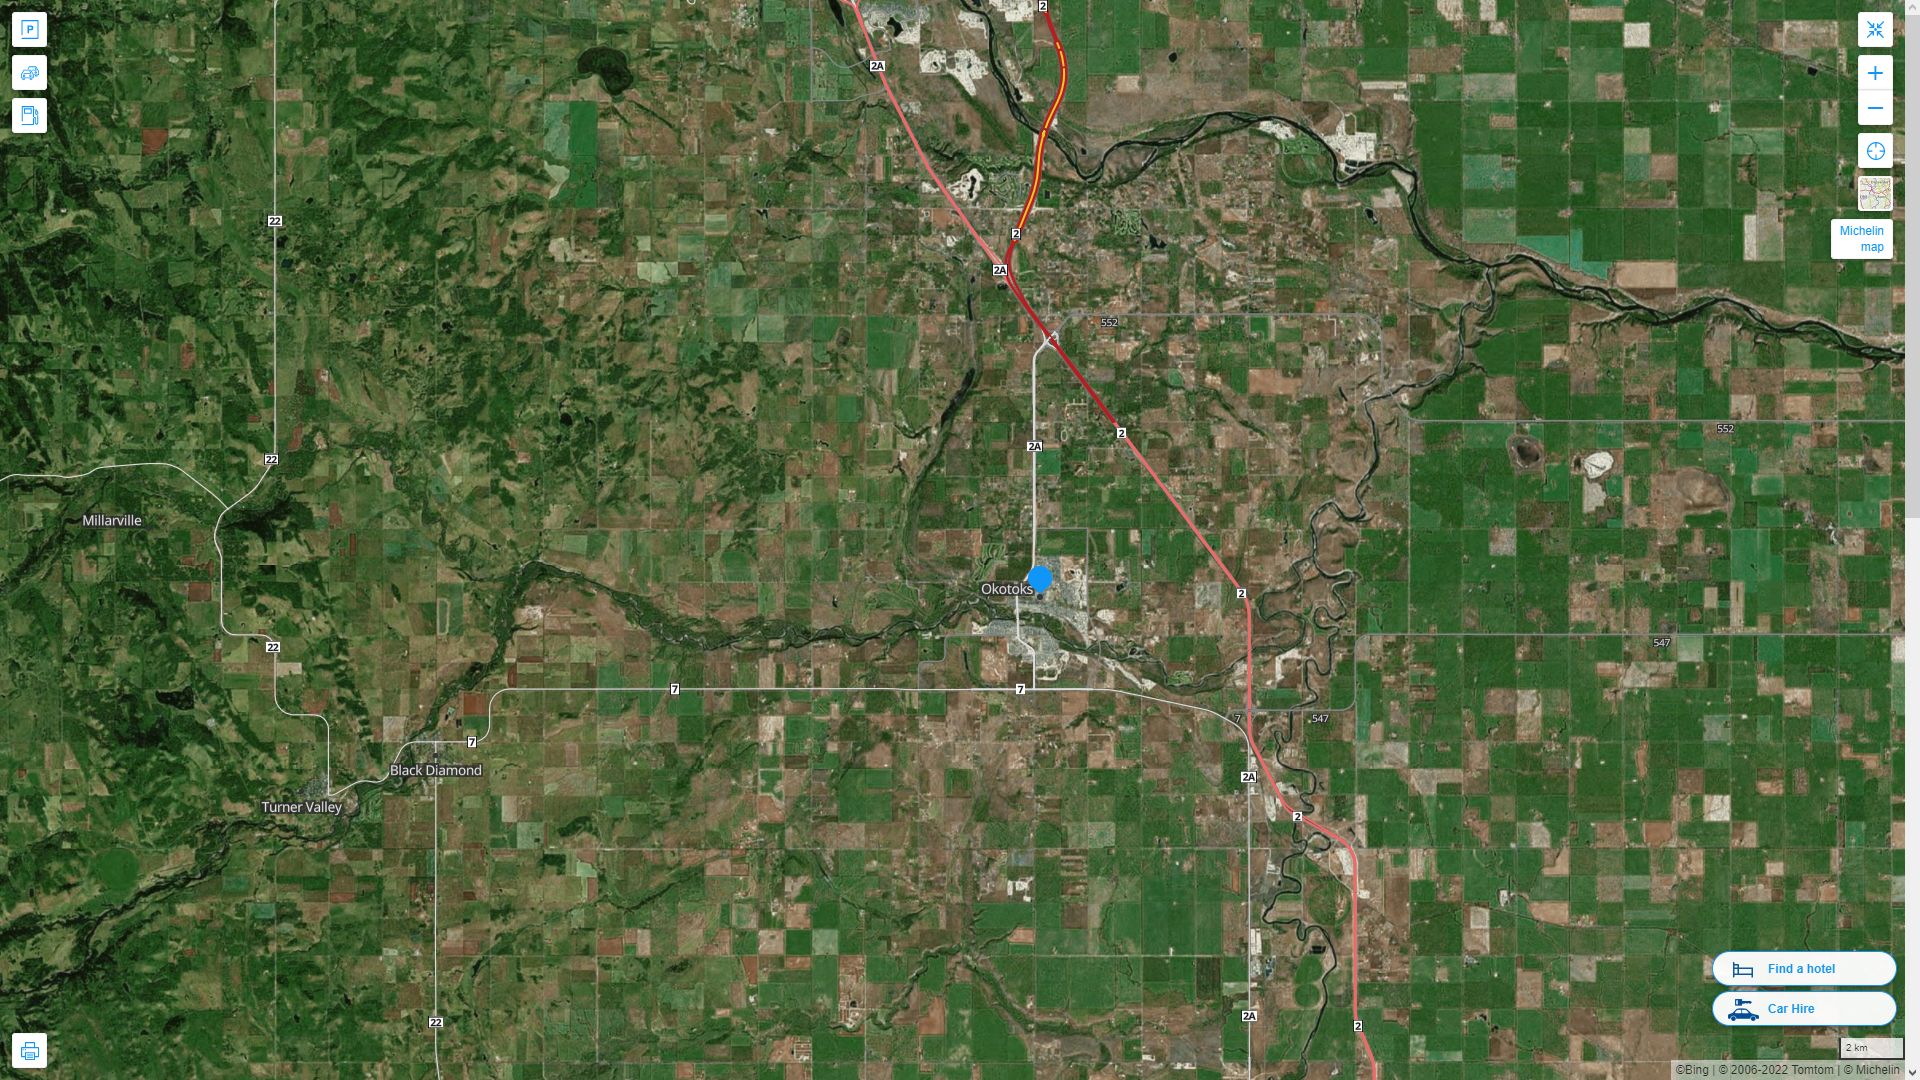 Okotoks Highway and Road Map with Satellite View